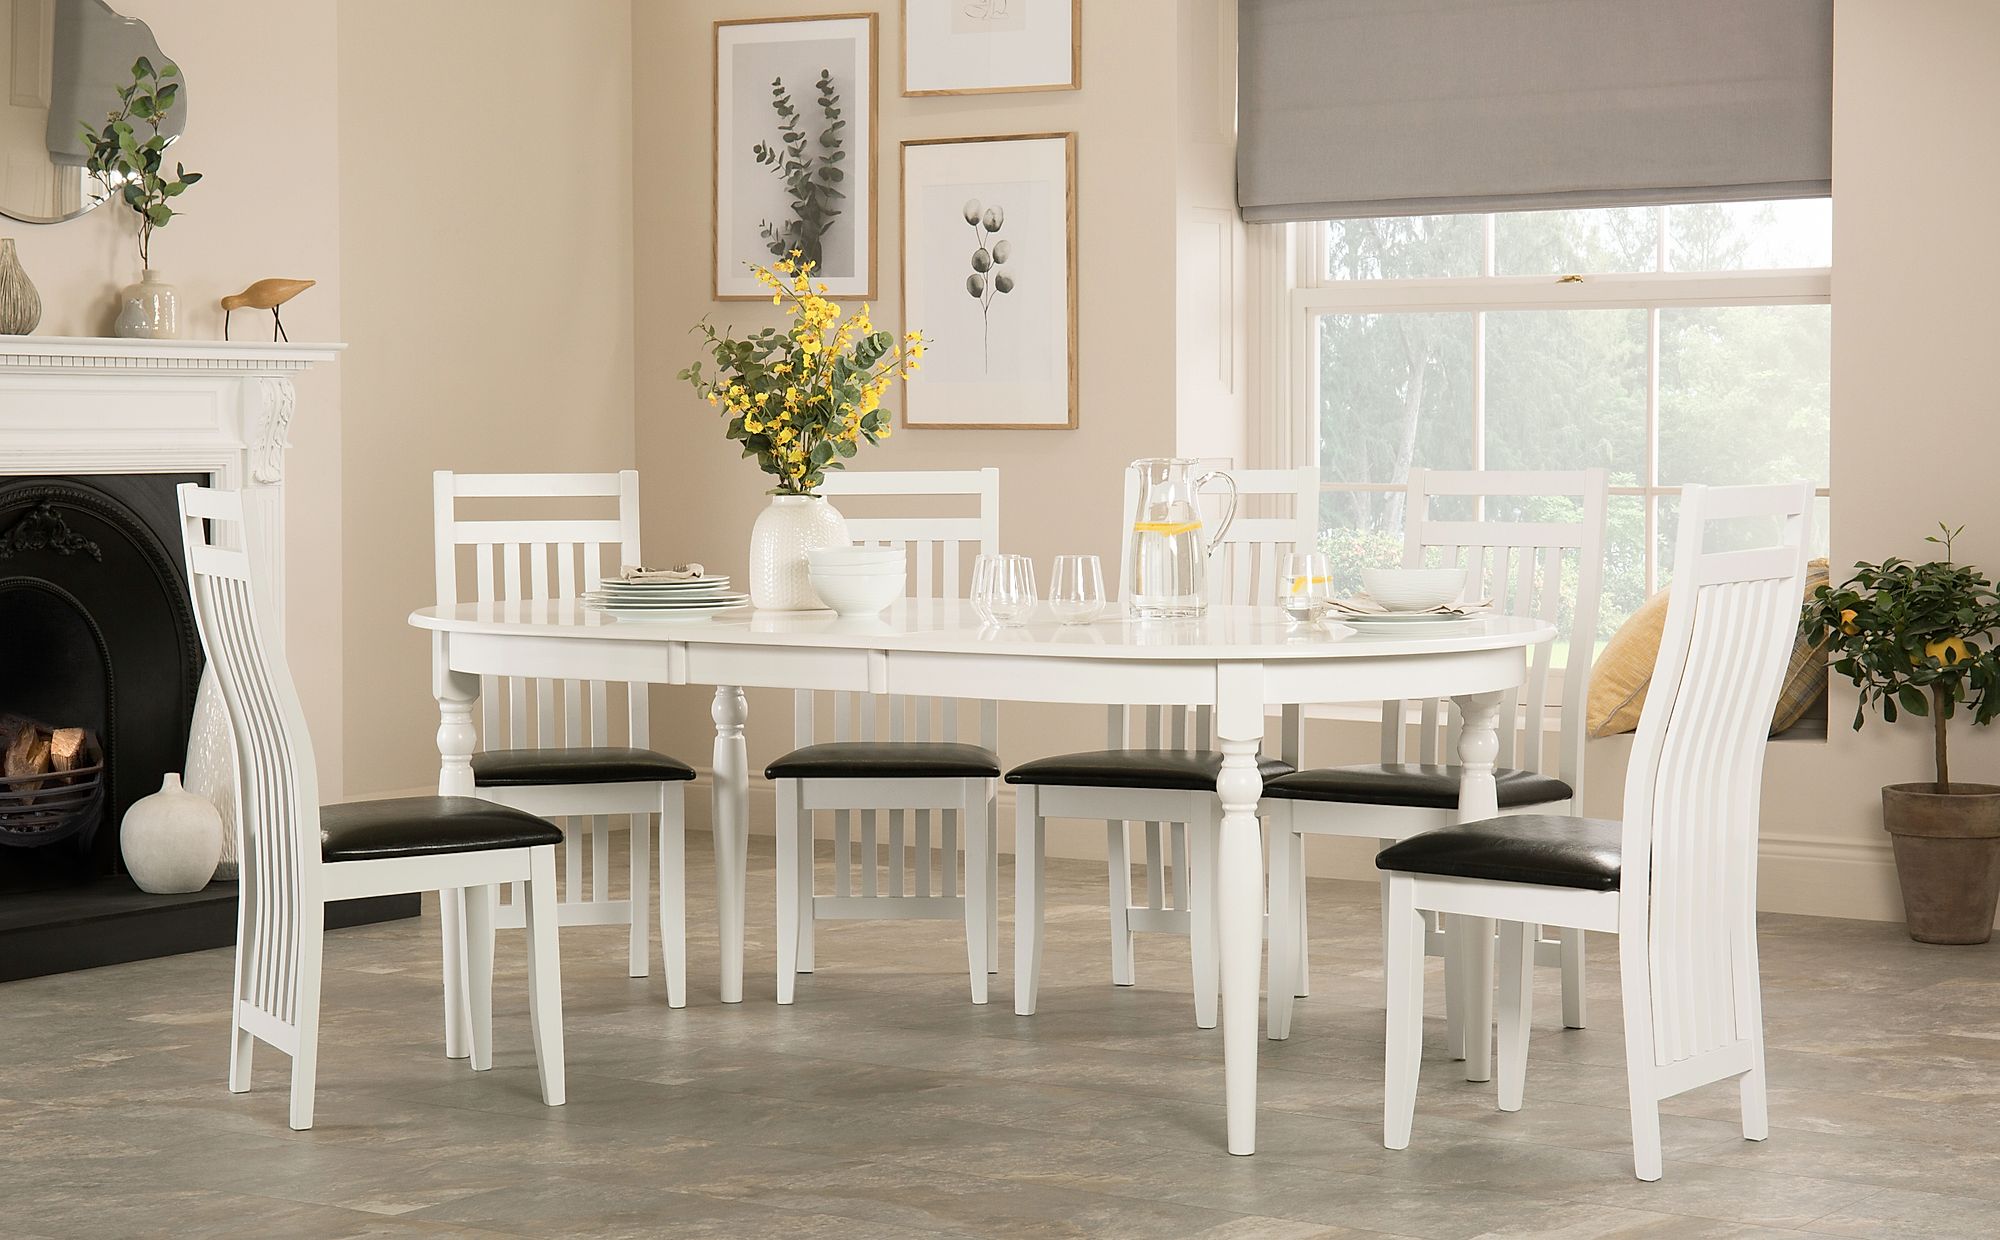 kitchen white tile oval table with chair